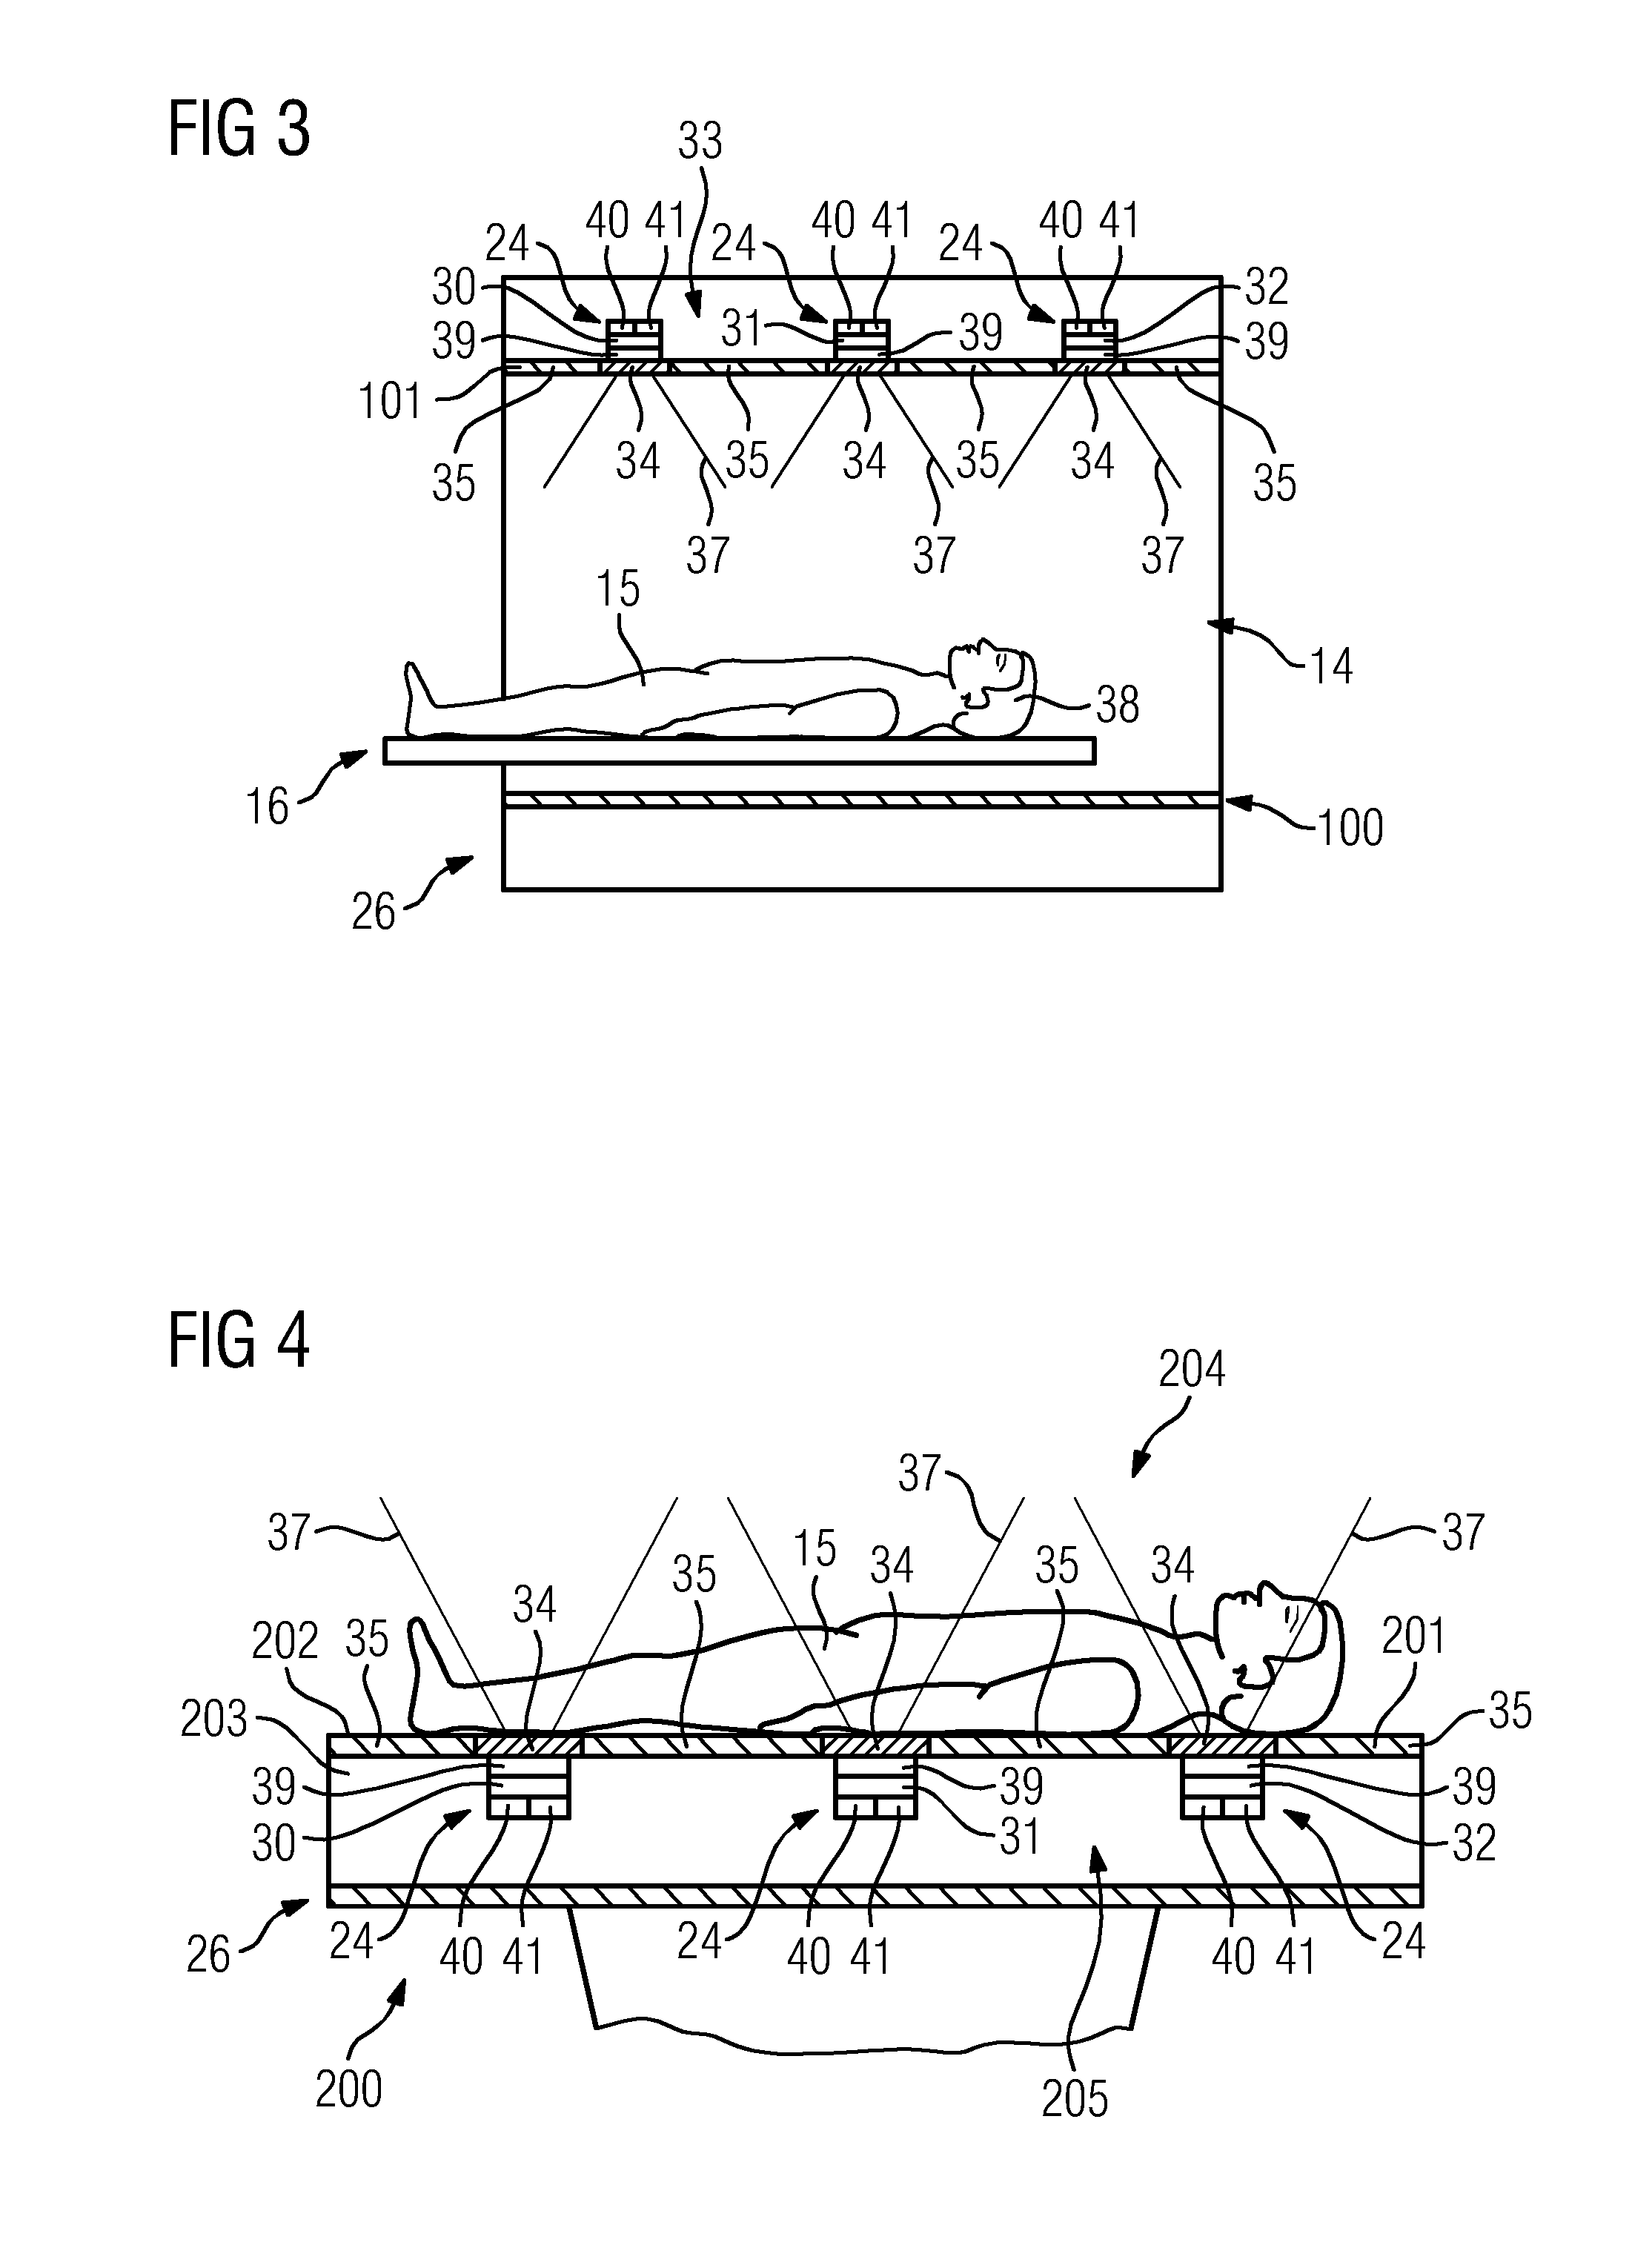 Magnetic resonance image recording unit and a magnetic resonance device having the magnetic resonance image recording unit